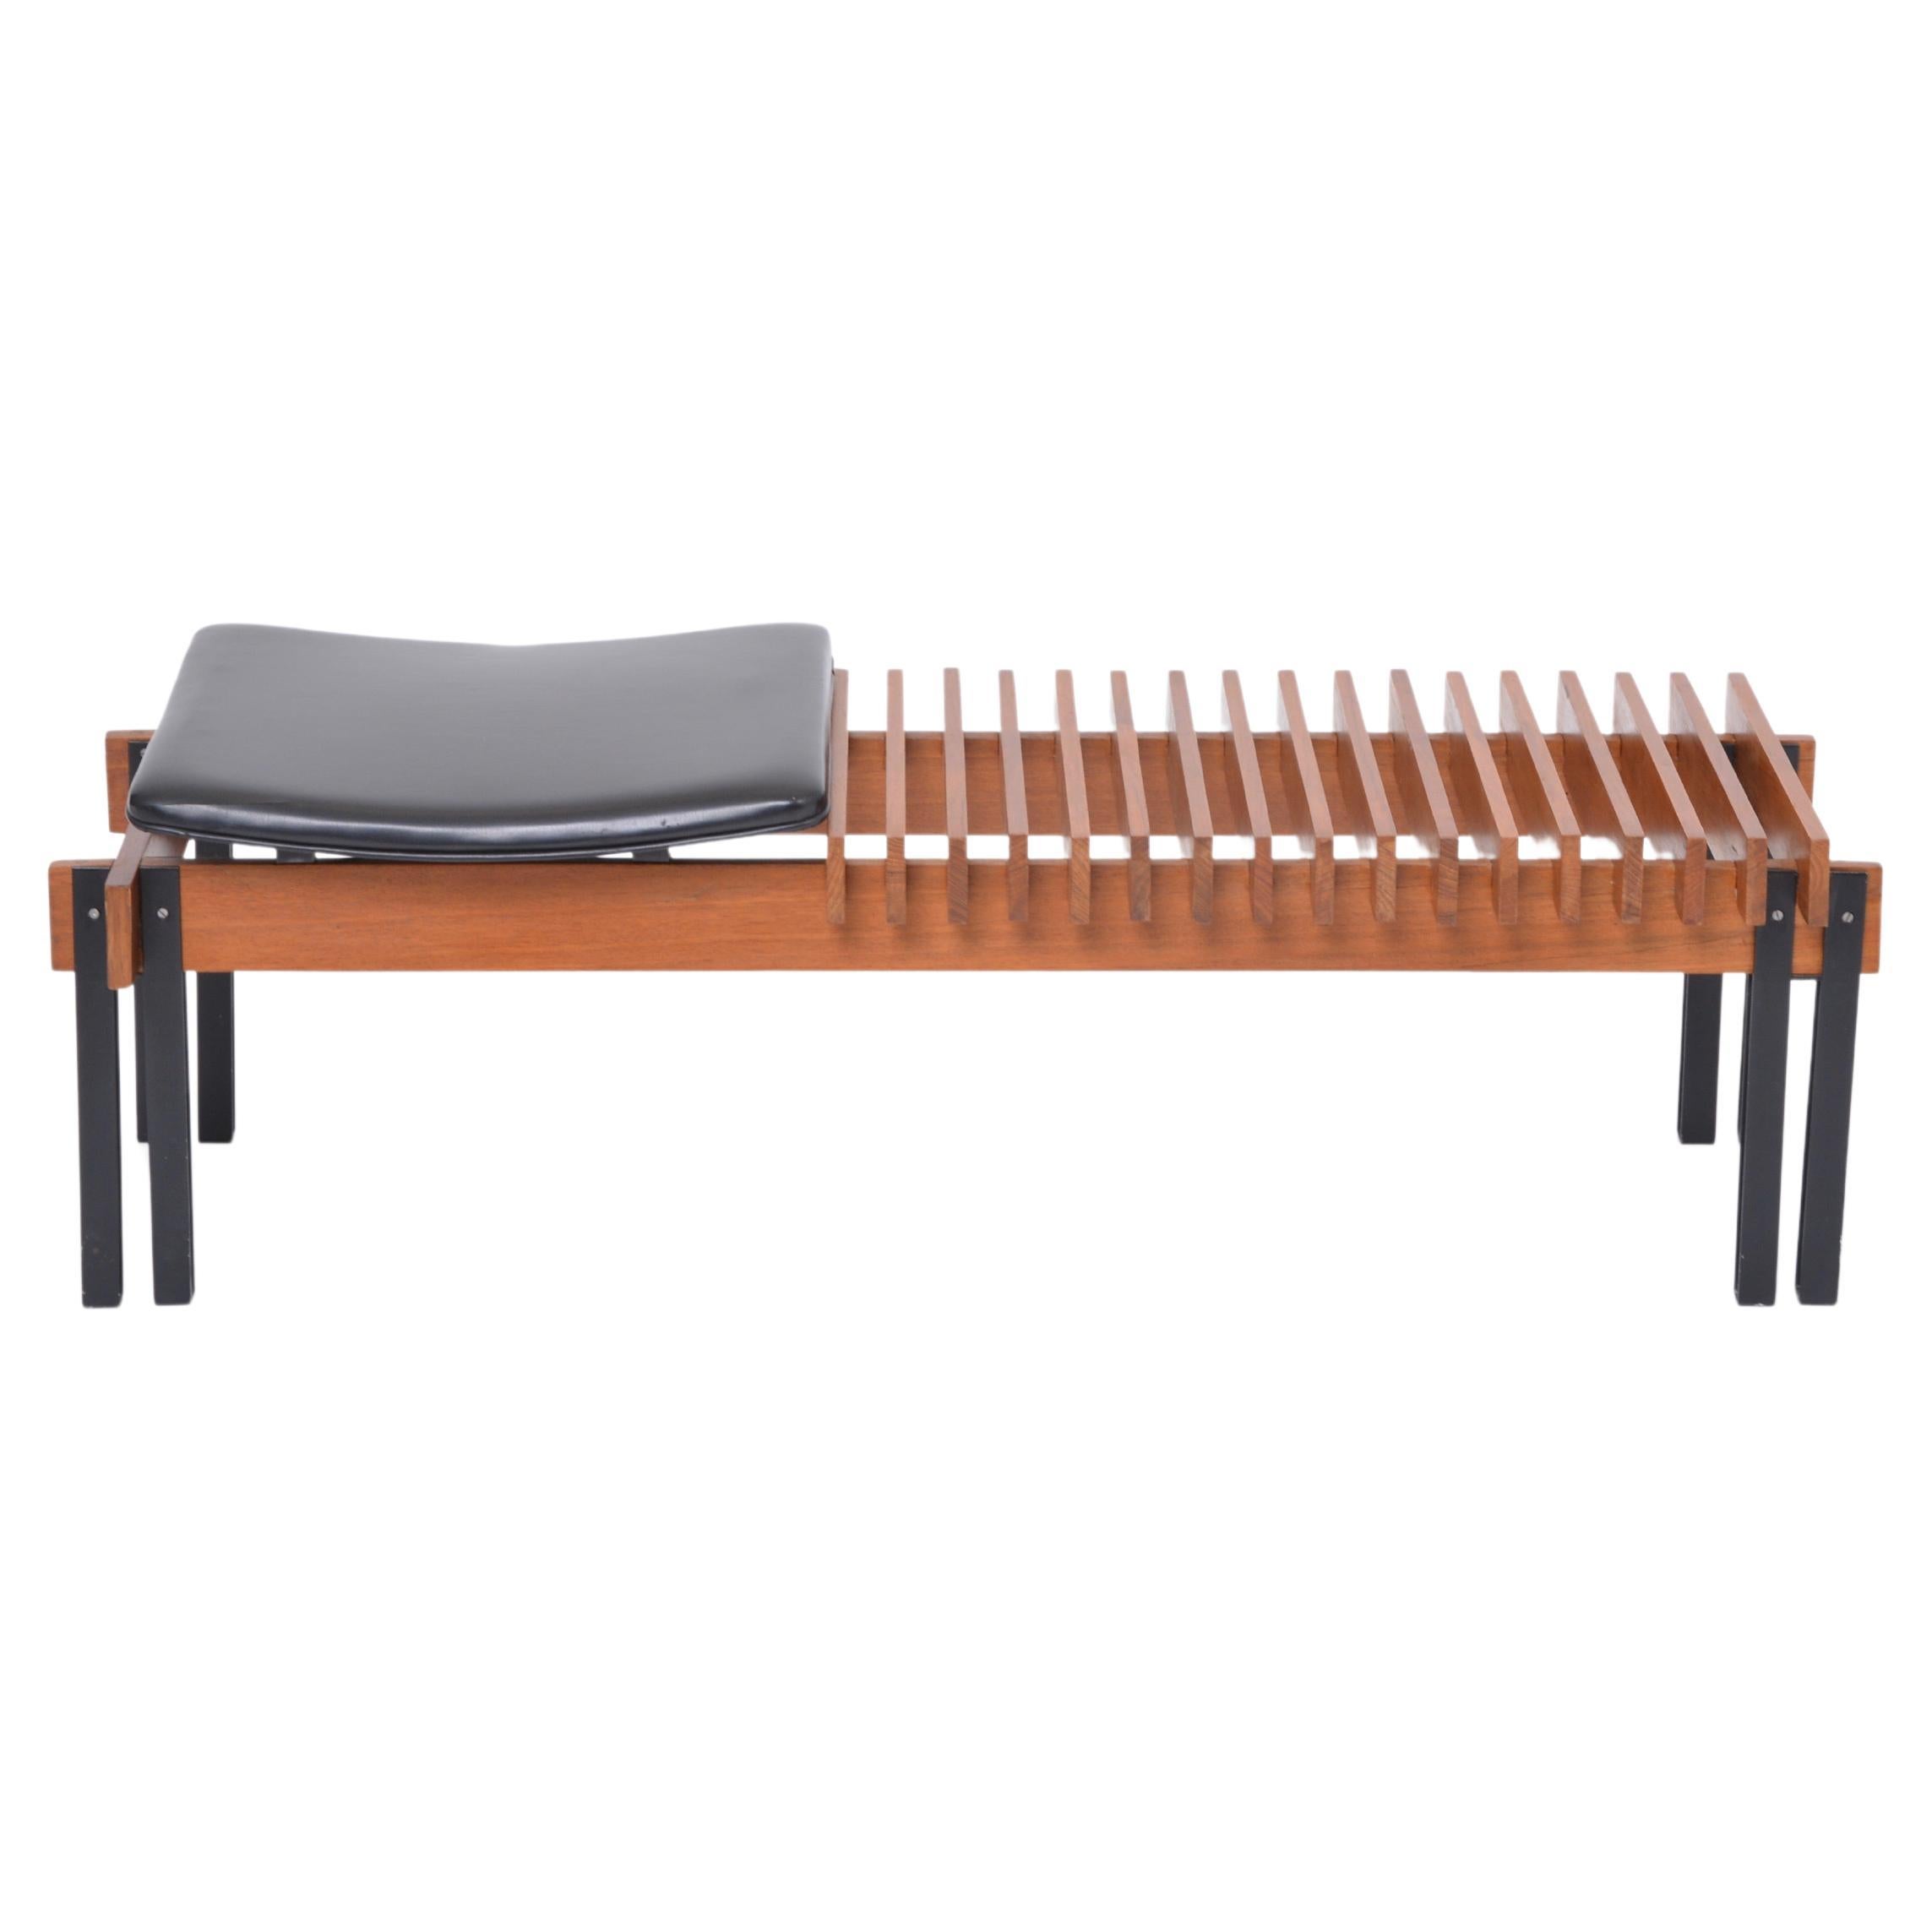 Mid-Century Modern slatted Teak bench by Inge and Luciano Rubino for Apec For Sale